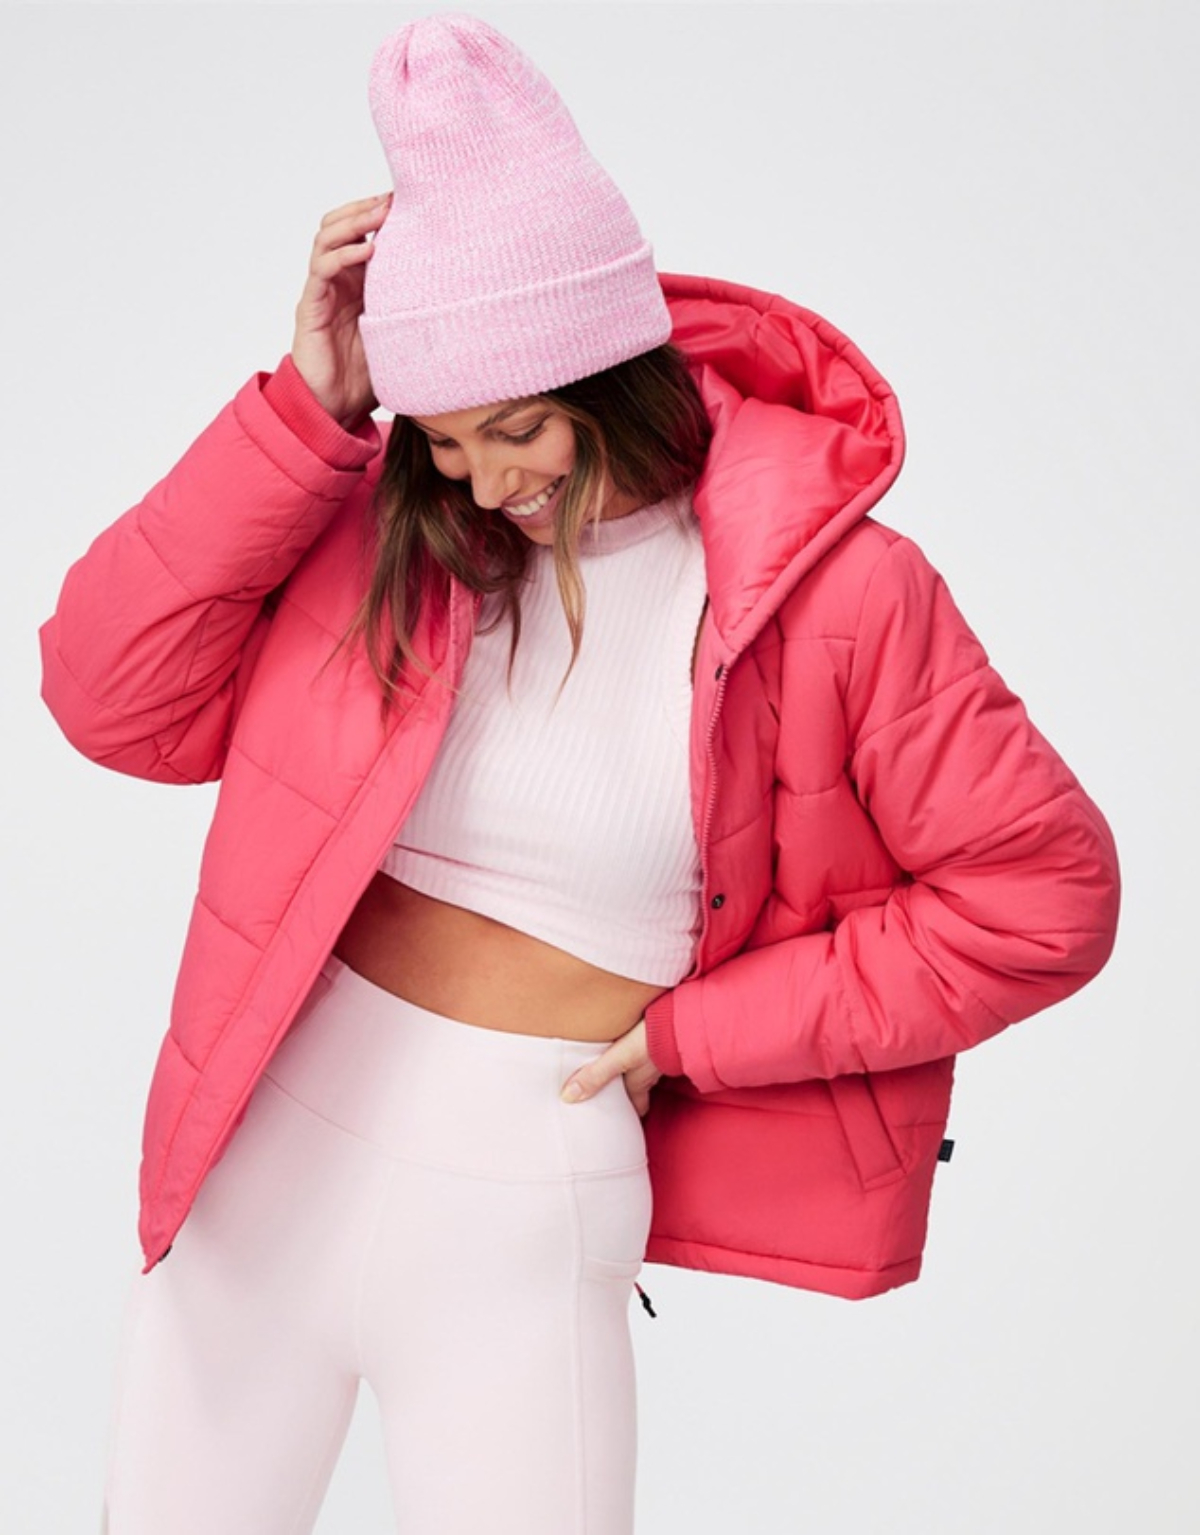 Activewear Under $100 to Keep You Warm This Winter